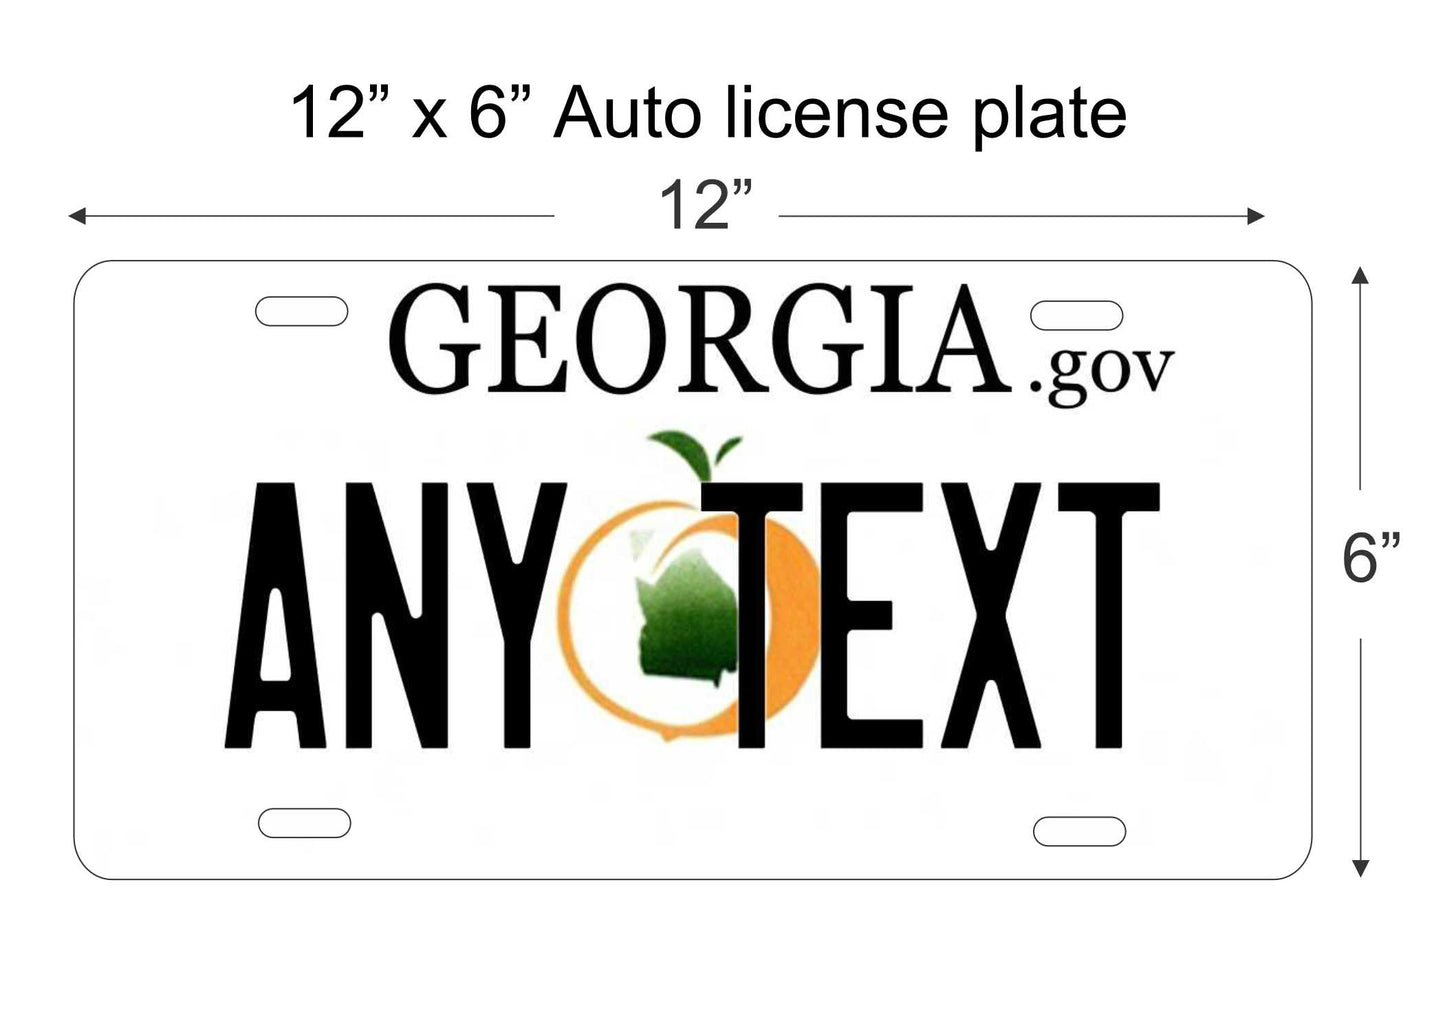 Georgia state personalized novelty vanity front license plate replica decorative aluminum sign car tag